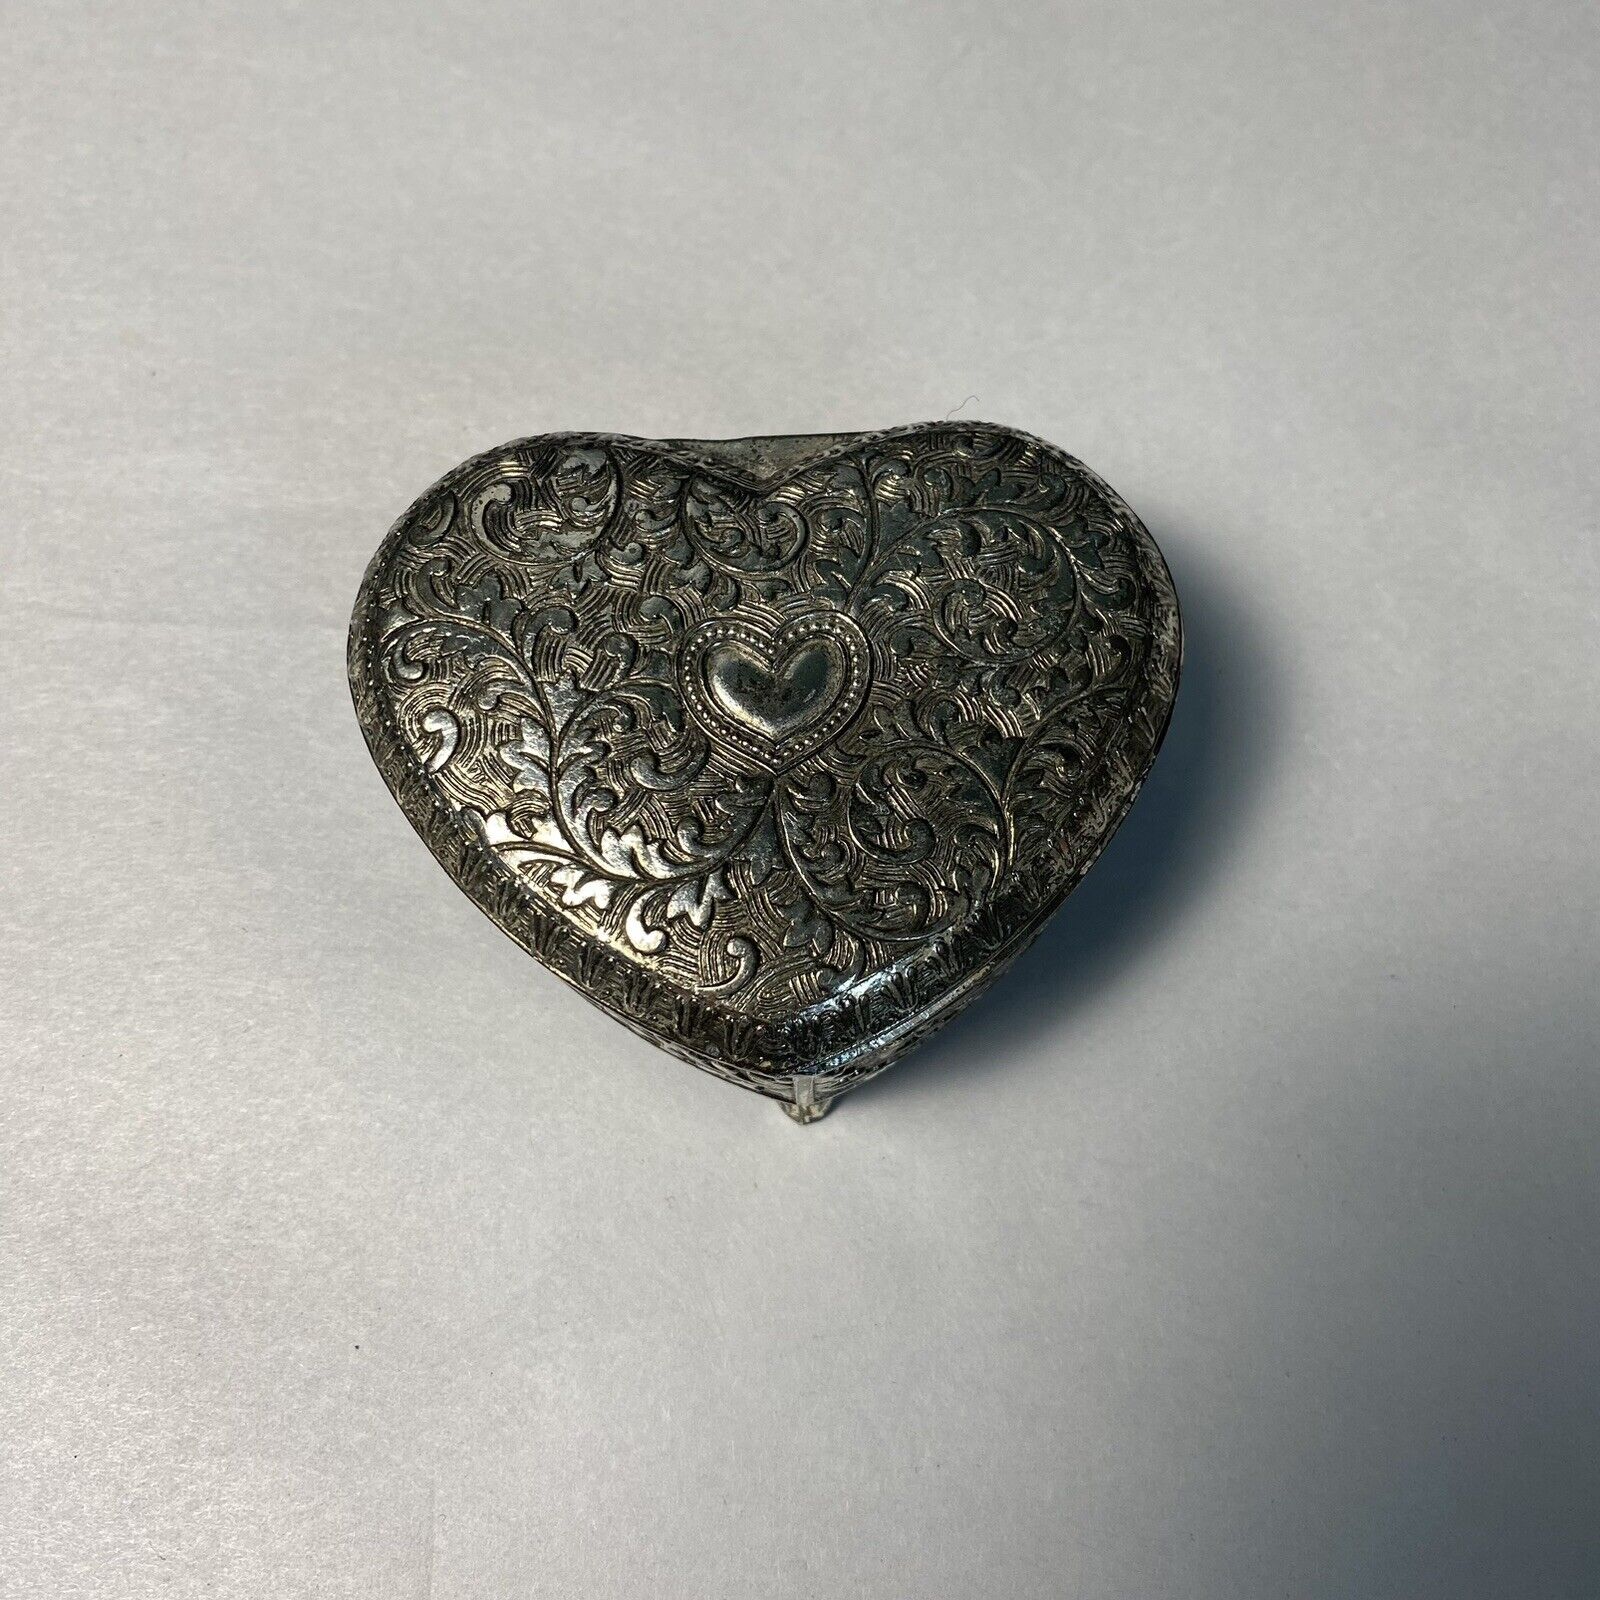 Vintage Heart Shaped Etched Metal Trinket Box With Red Lining 3”